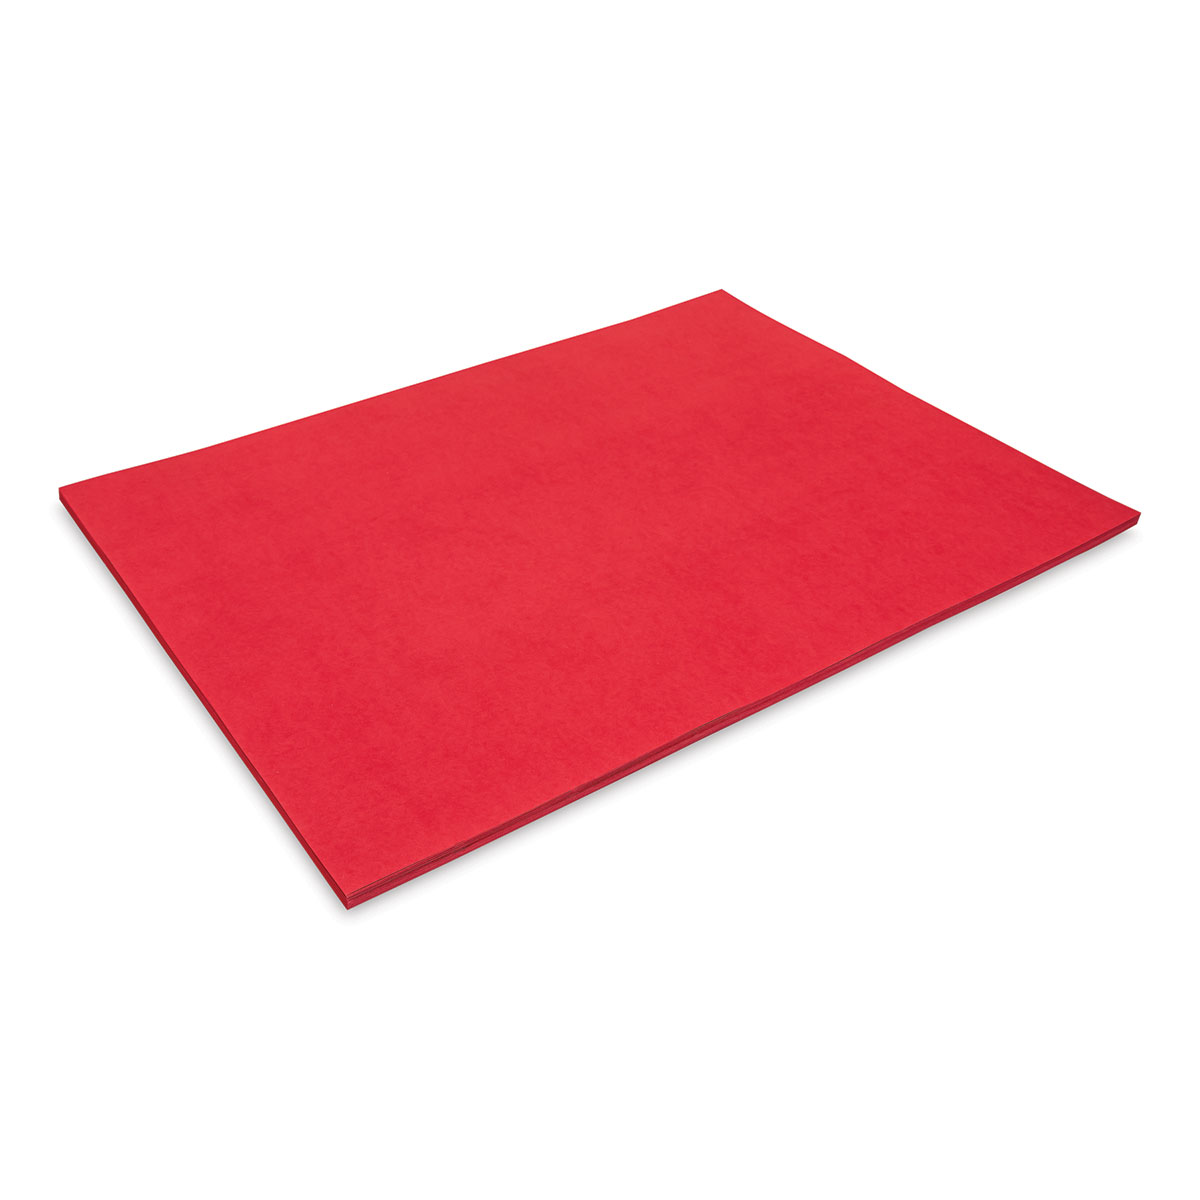 Construction Paper 12X18 Red, 48 Sheets/Pack (1402-100) 